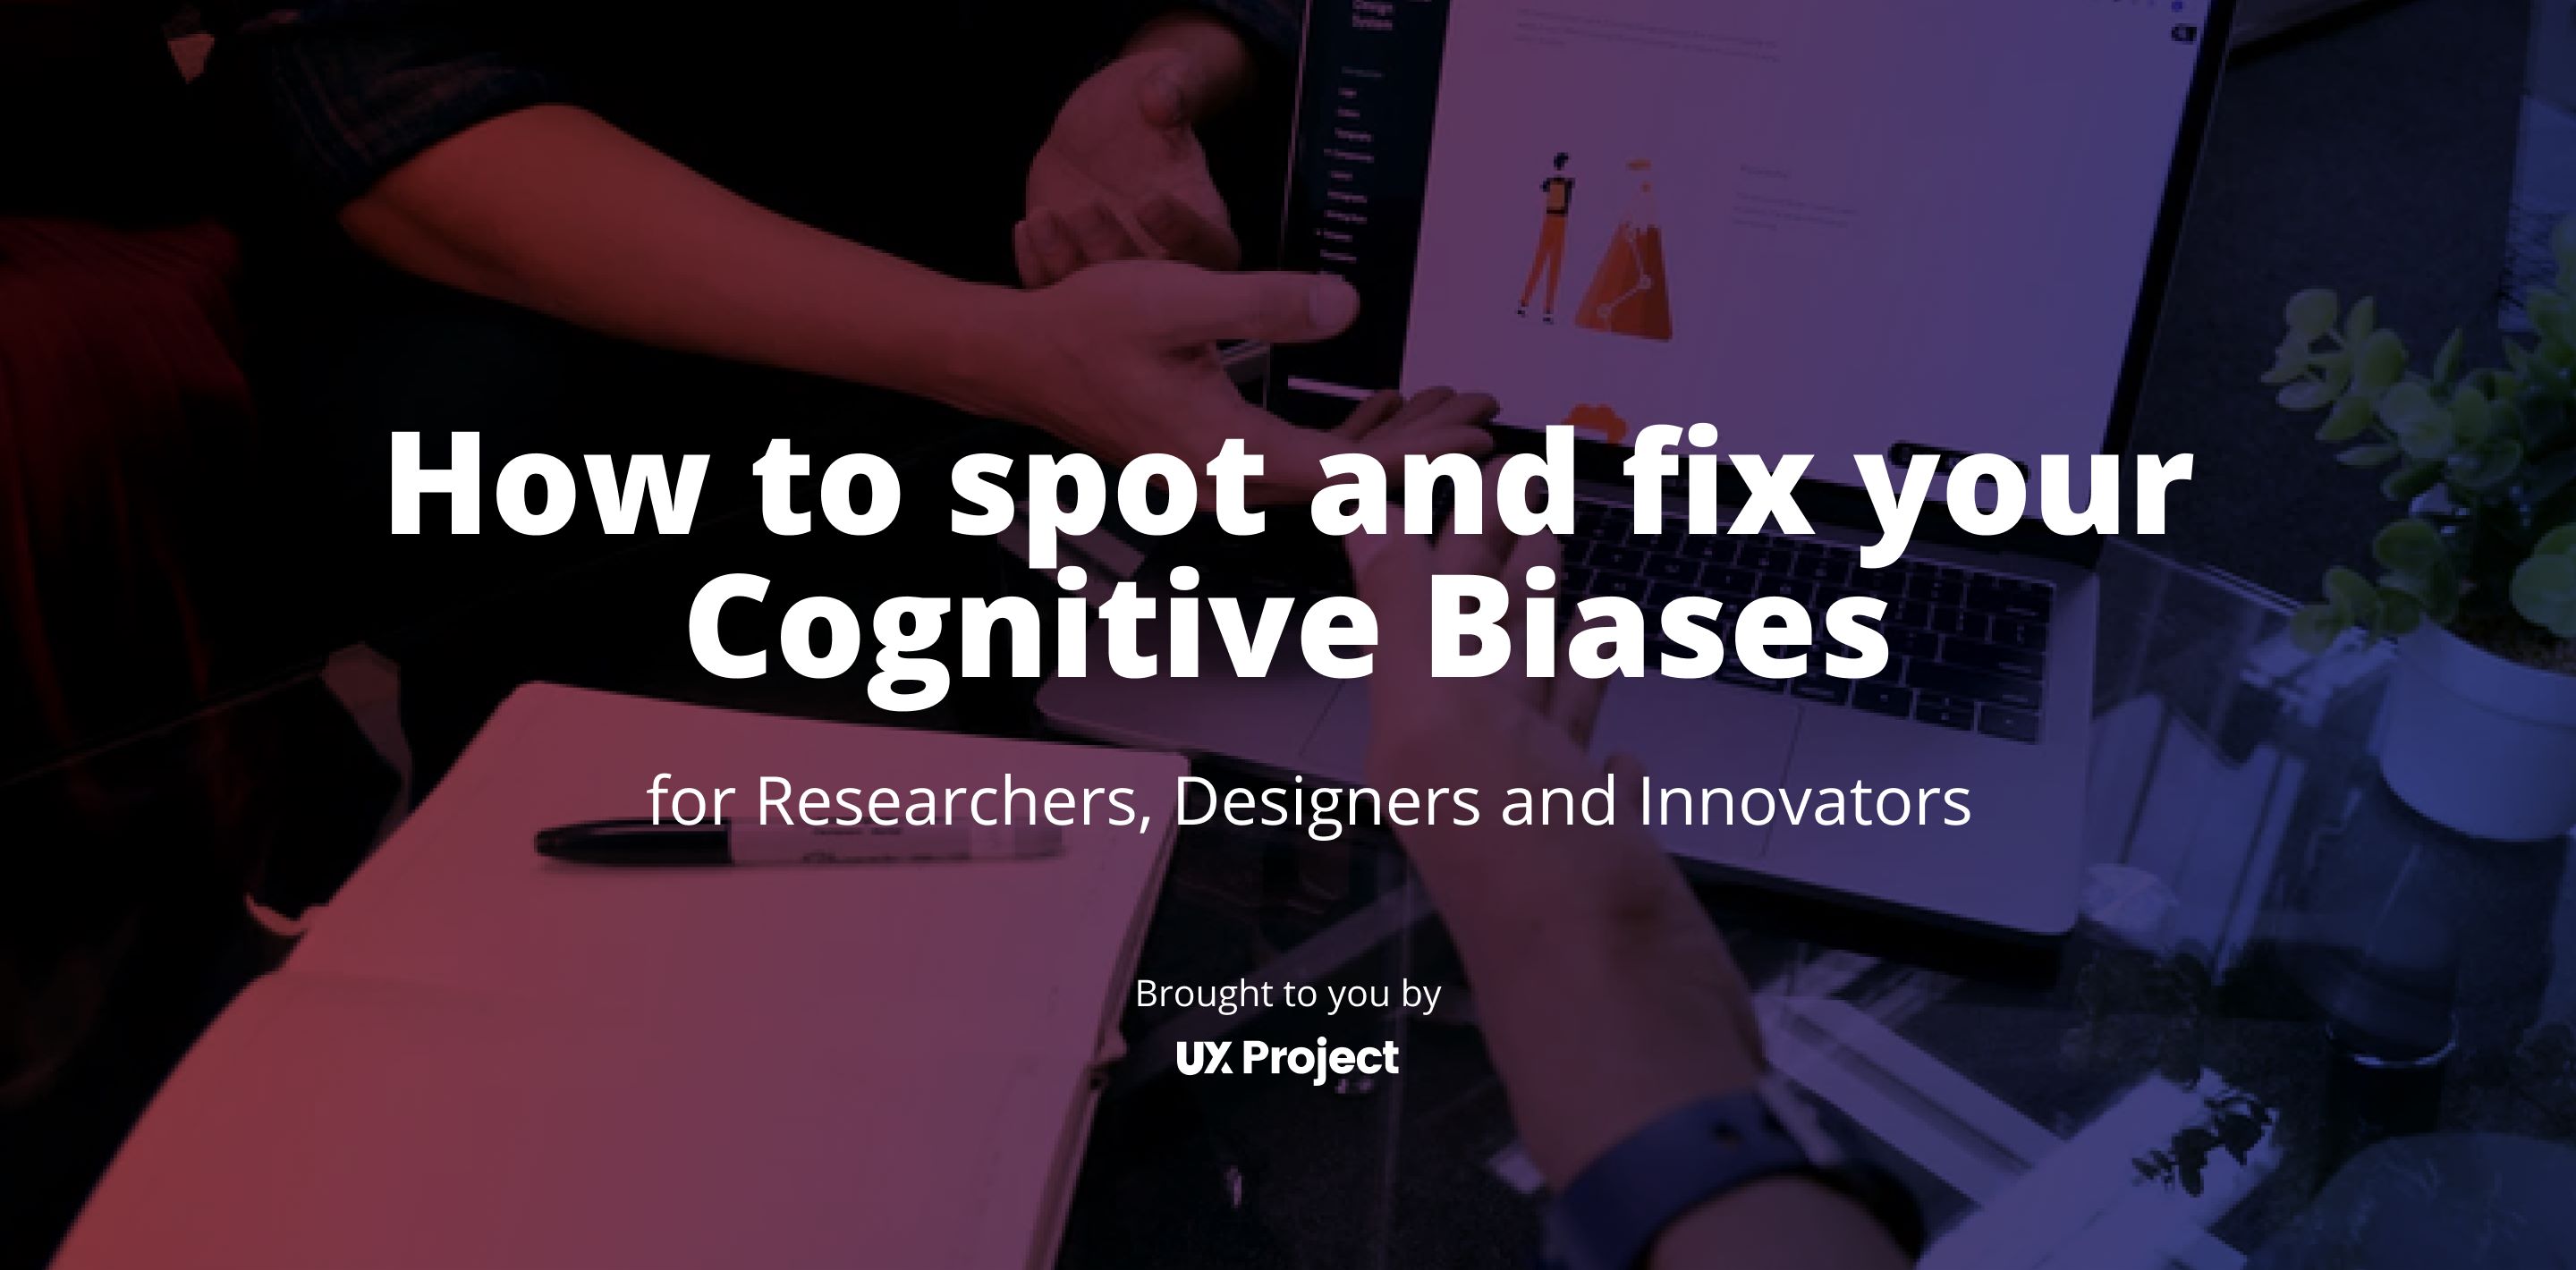 How to Spot and Fix Your Cognitive Biases